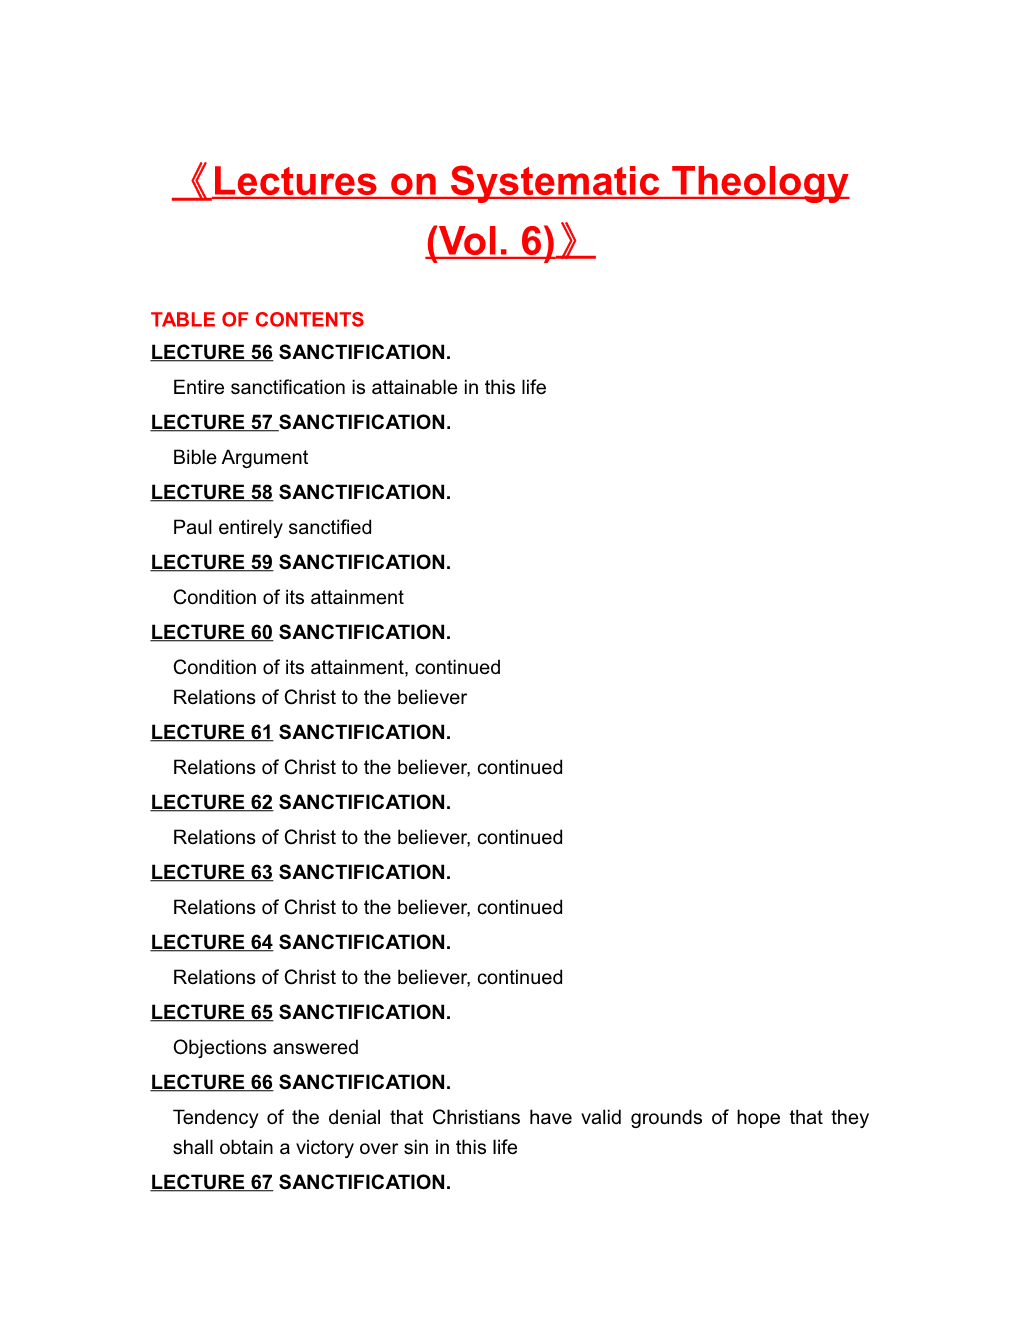 Lectures on Systematic Theology (Vol. 6)